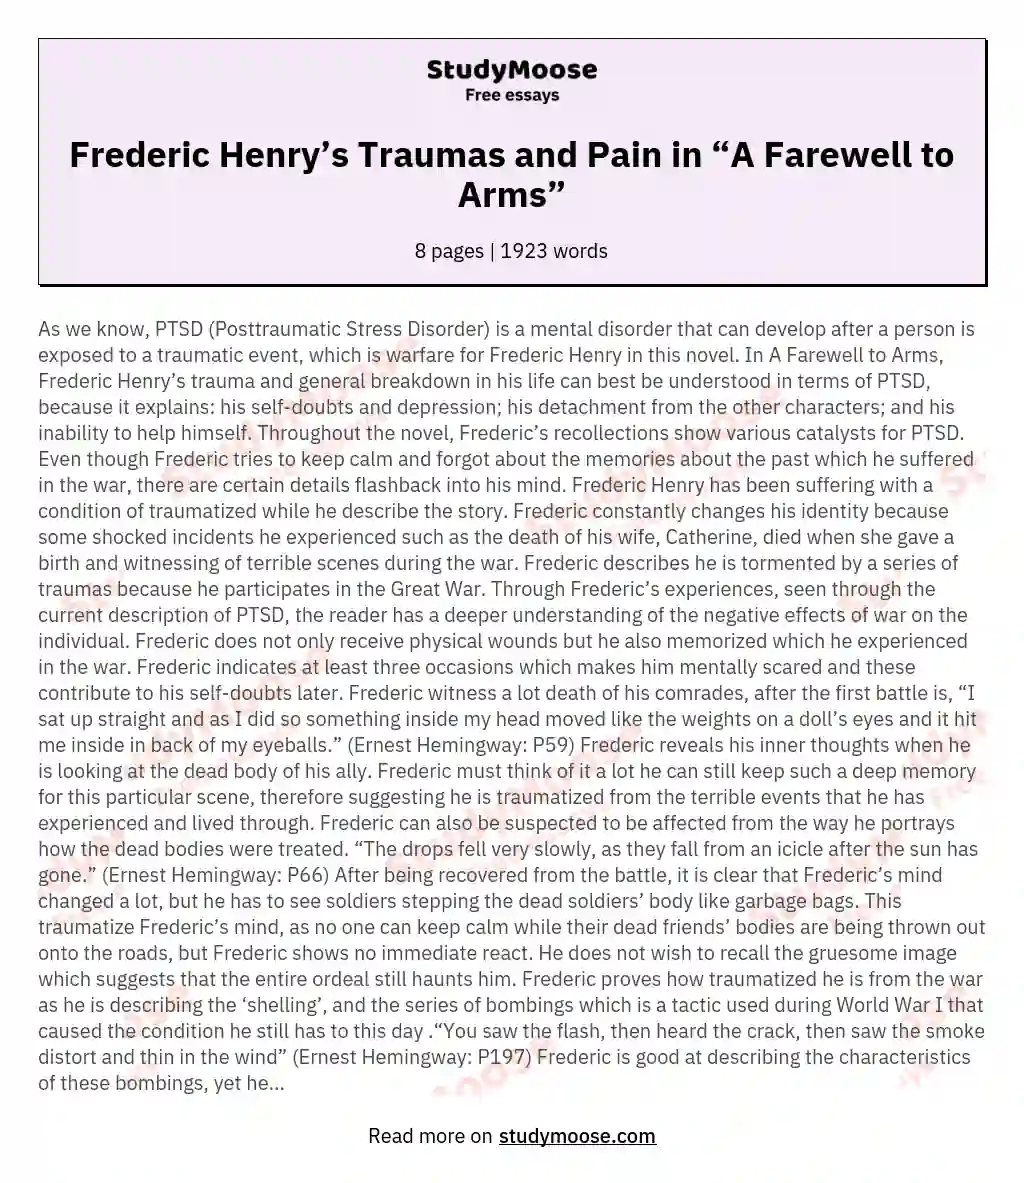 Frederic Henry’s Traumas and Pain in “A Farewell to Arms”